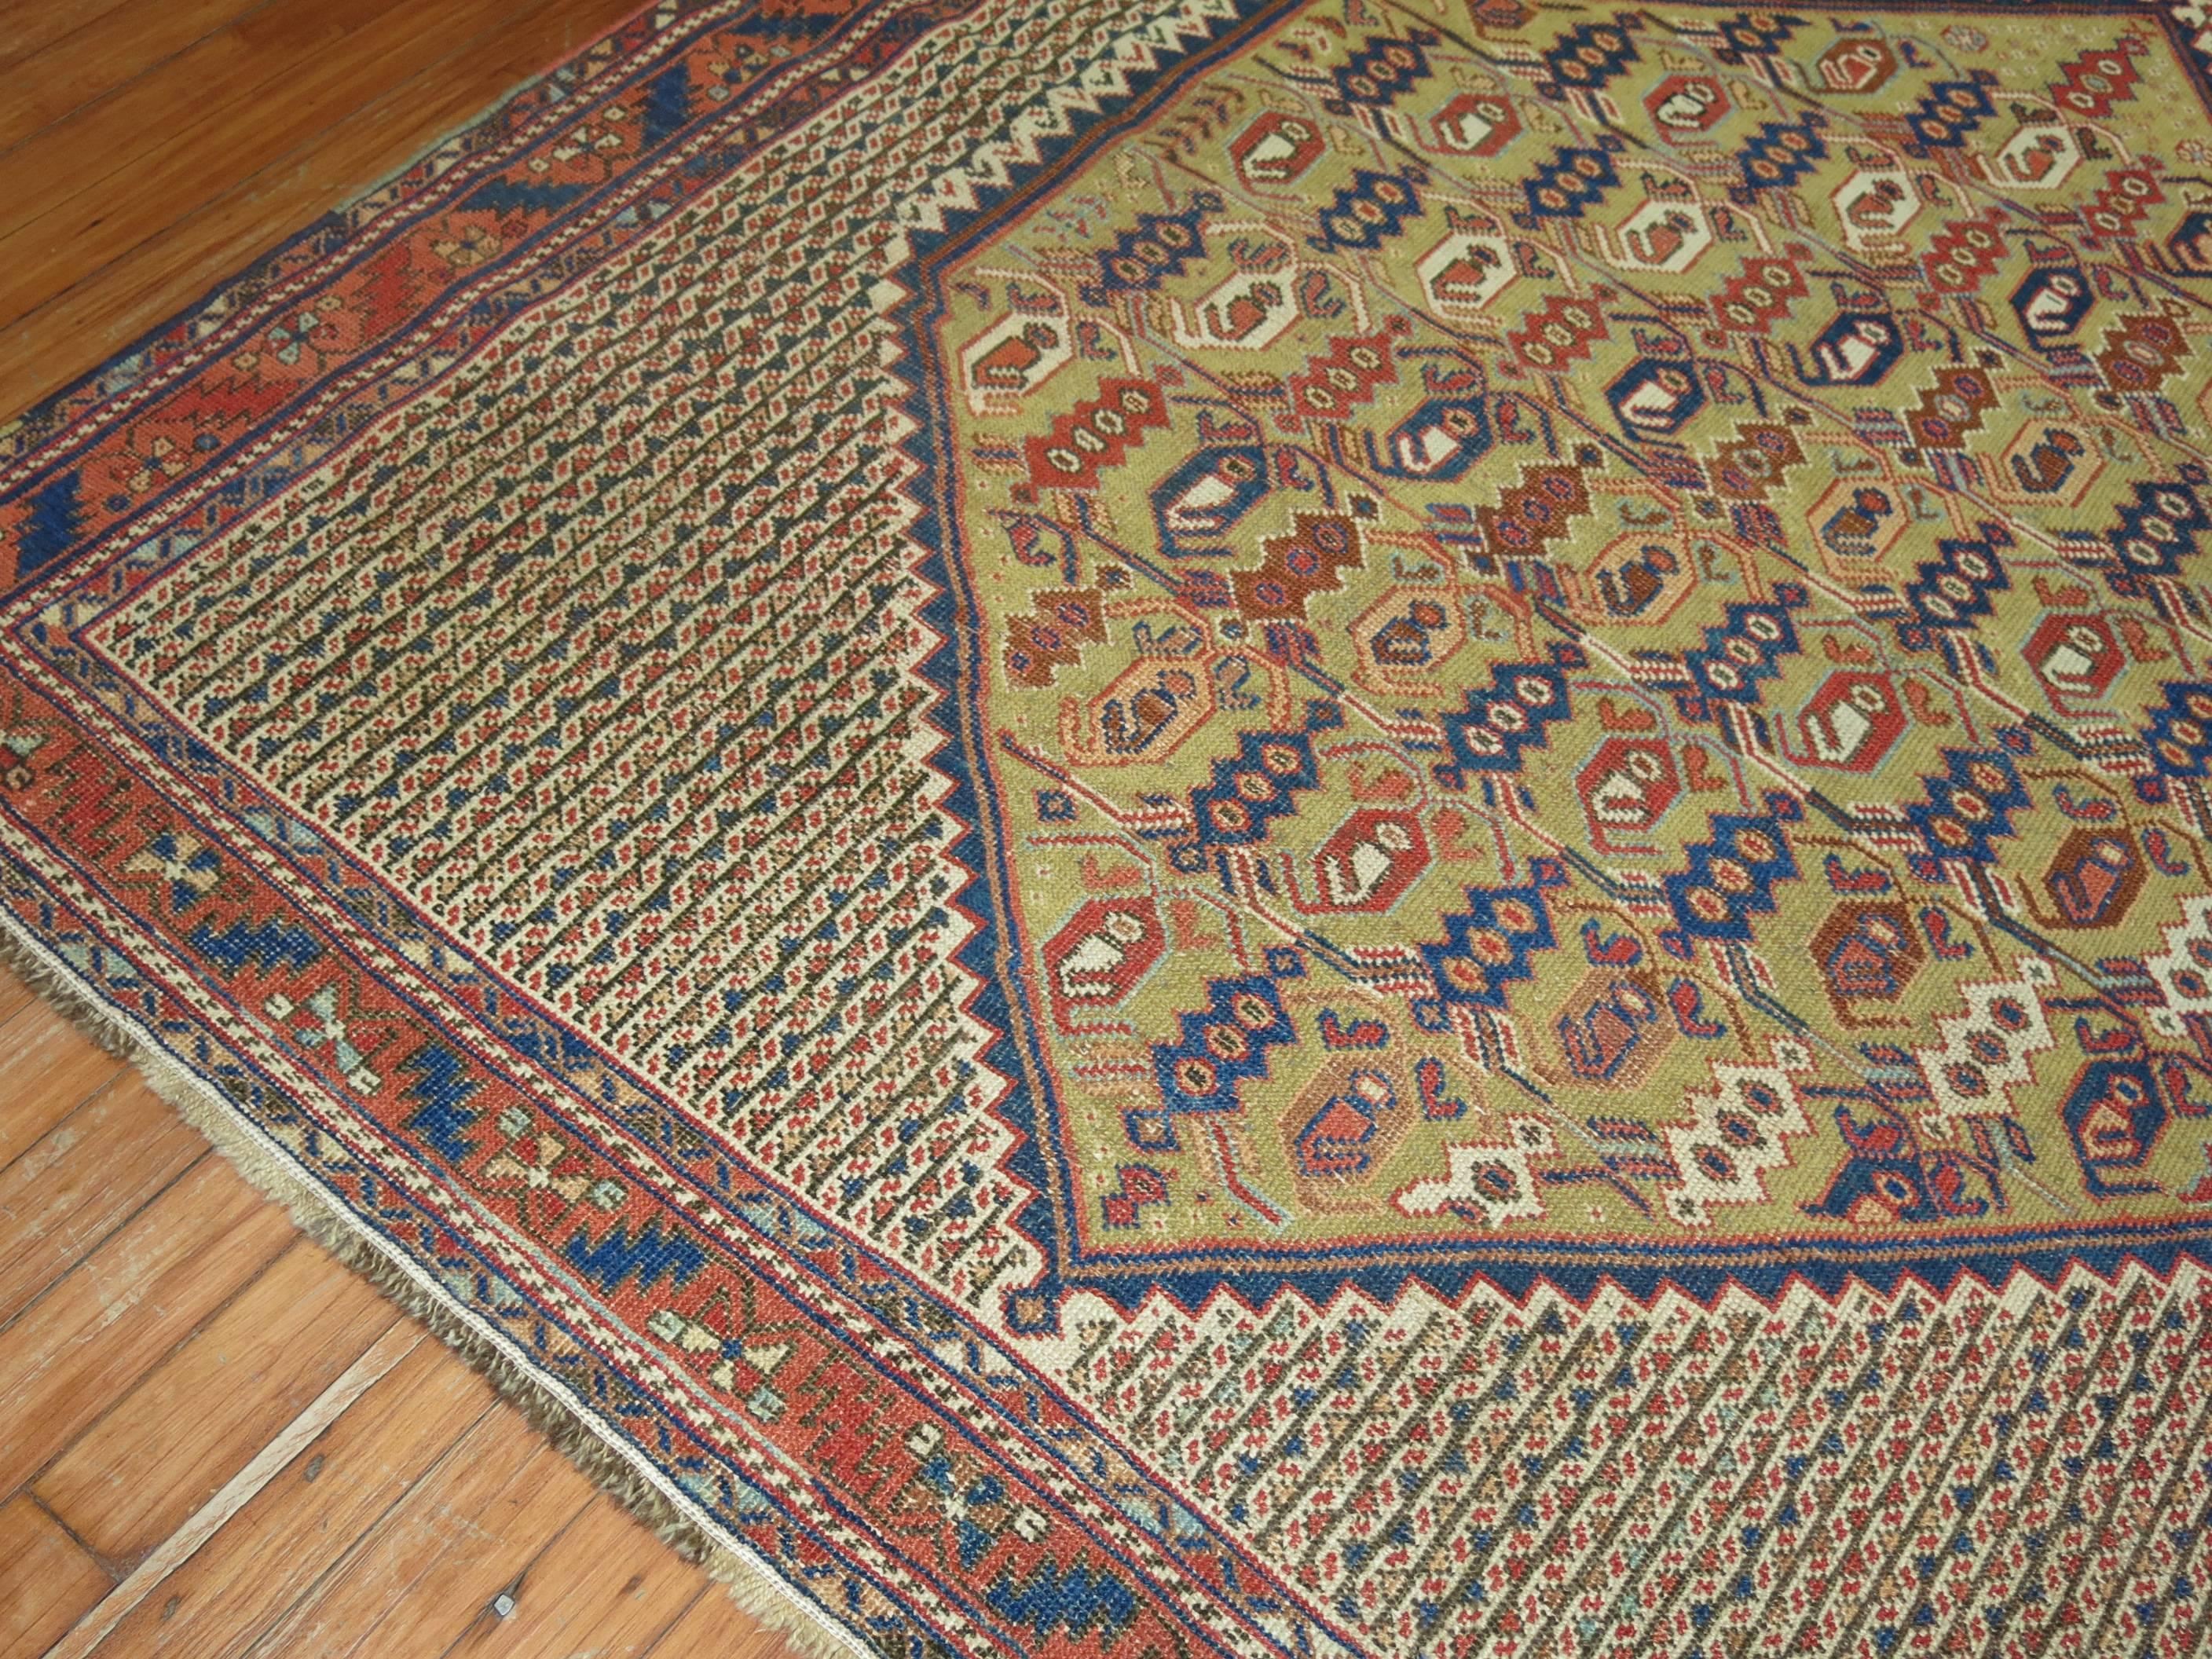 A unique rare small afshar carpet containing a boteh pattern set on a camel medallion on a striped ivory ground and rust border. Hard to find Squarish size. A great addition to anyones home or collection.

4'7'' x 5'2''